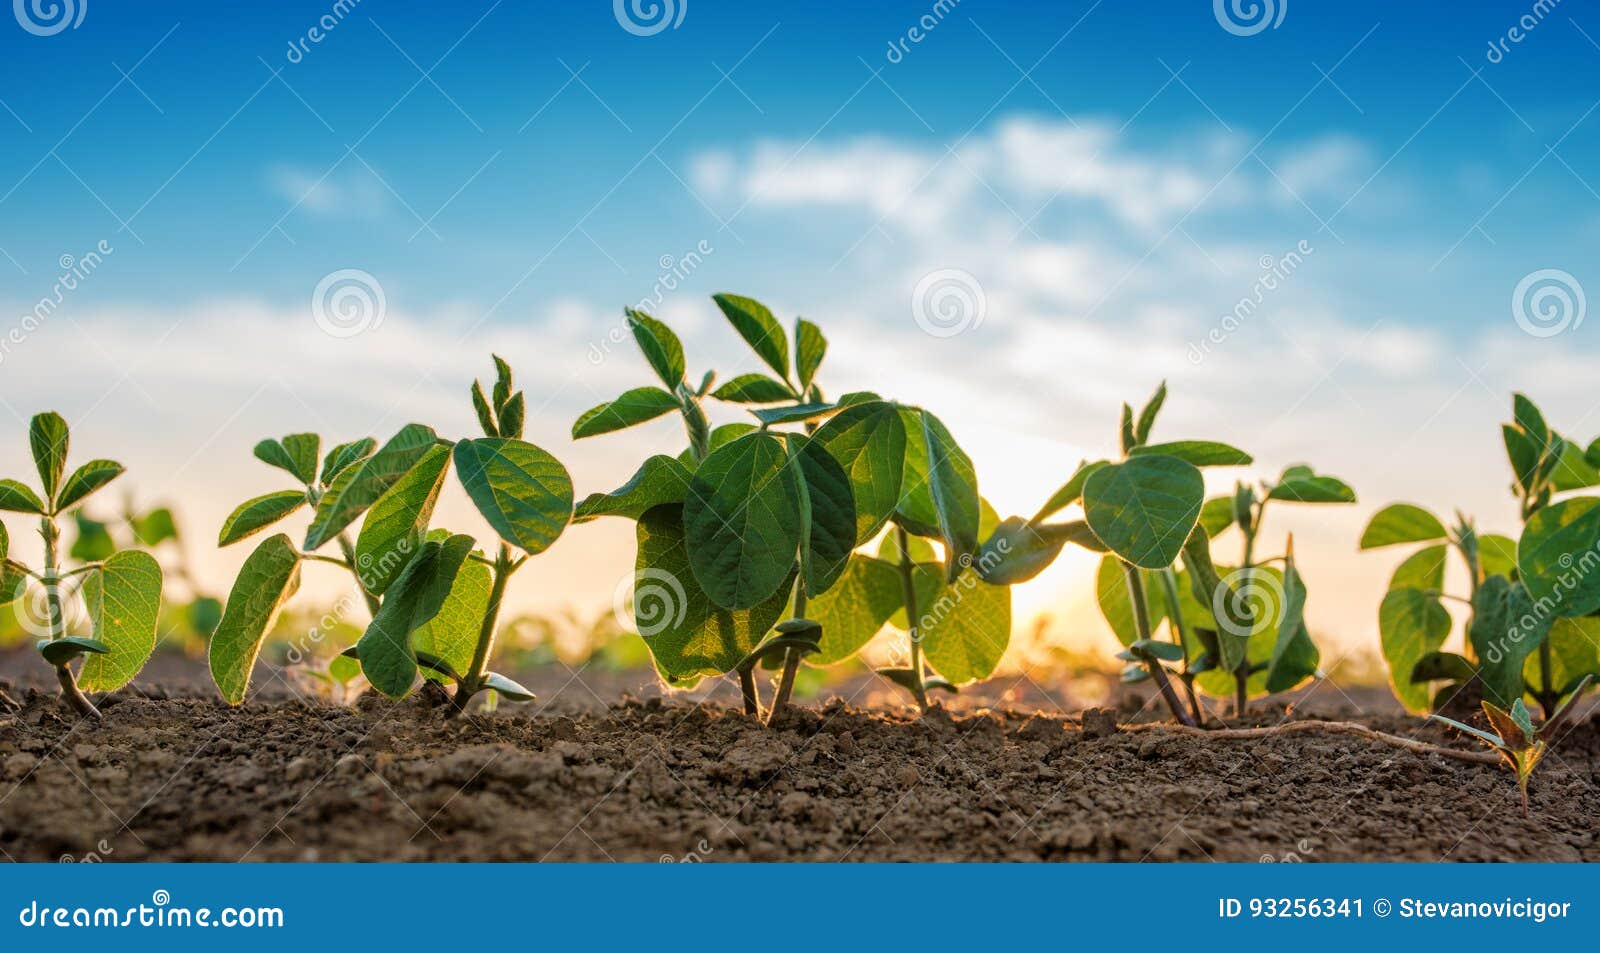 small soybean plants growing in row